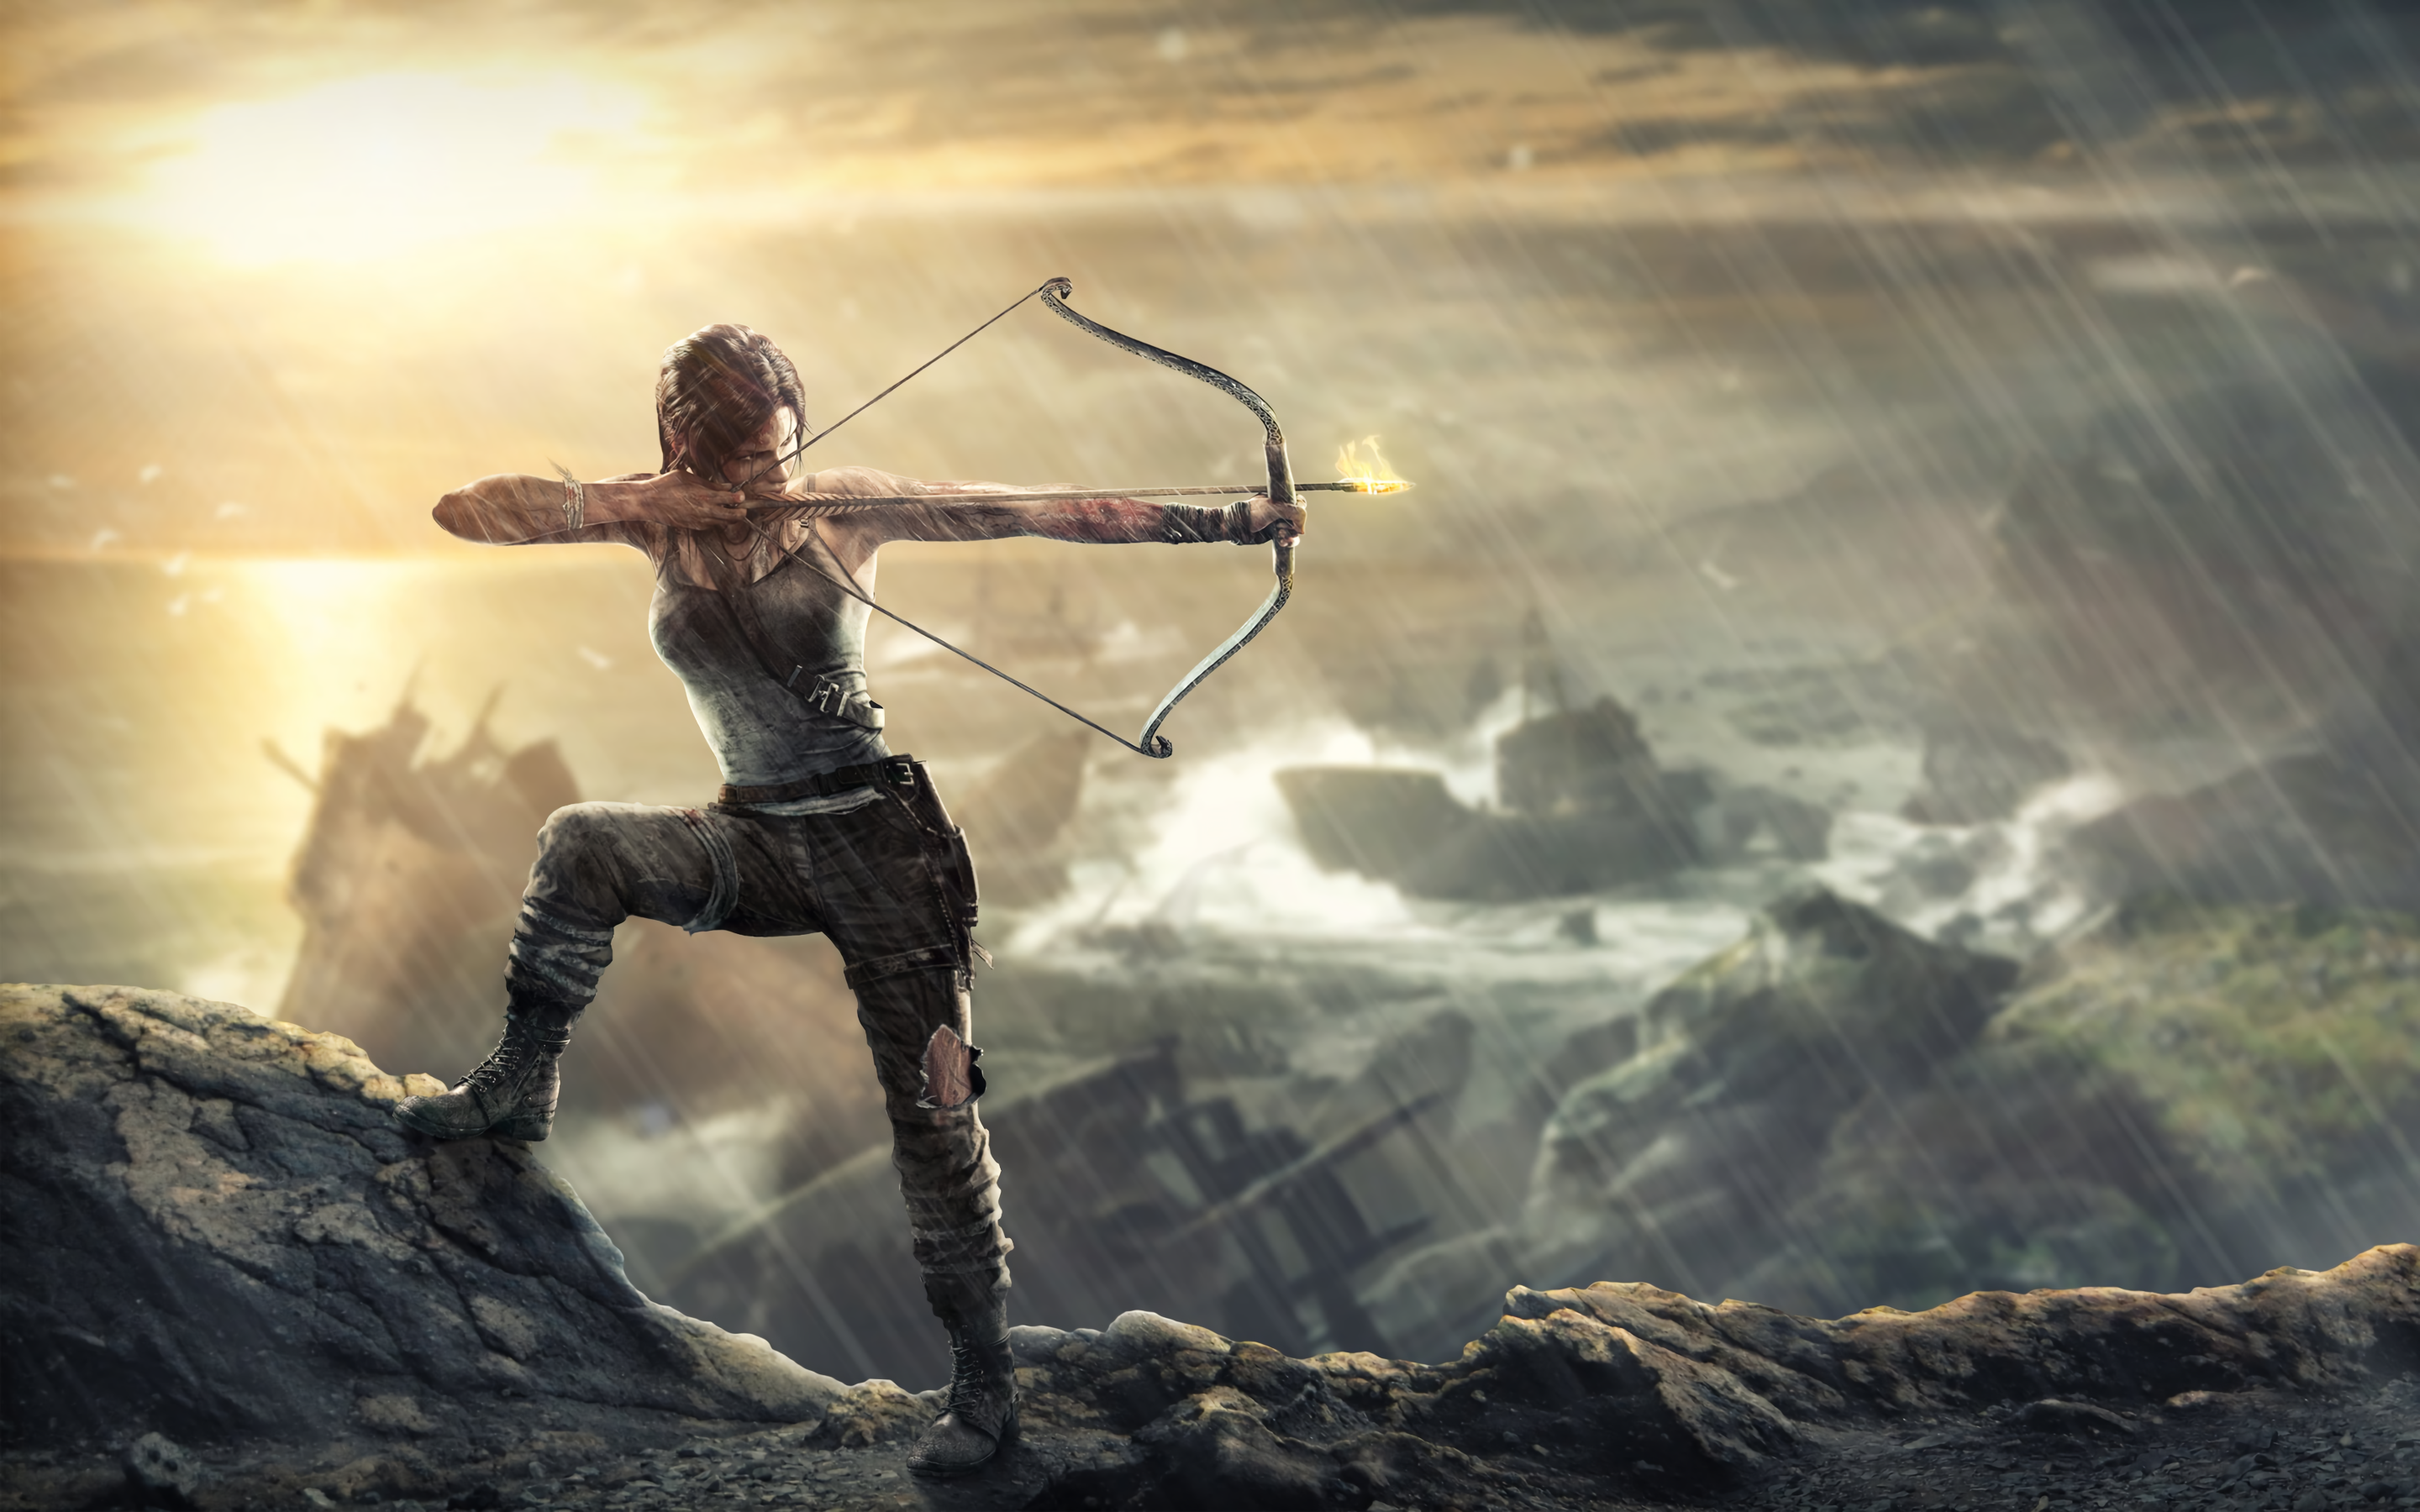 General 2880x1800 Tomb Raider video game art digital art video games sky clouds outdoors sunlight bow video game characters Lara Croft (Tomb Raider) bow and arrow aiming video game girls